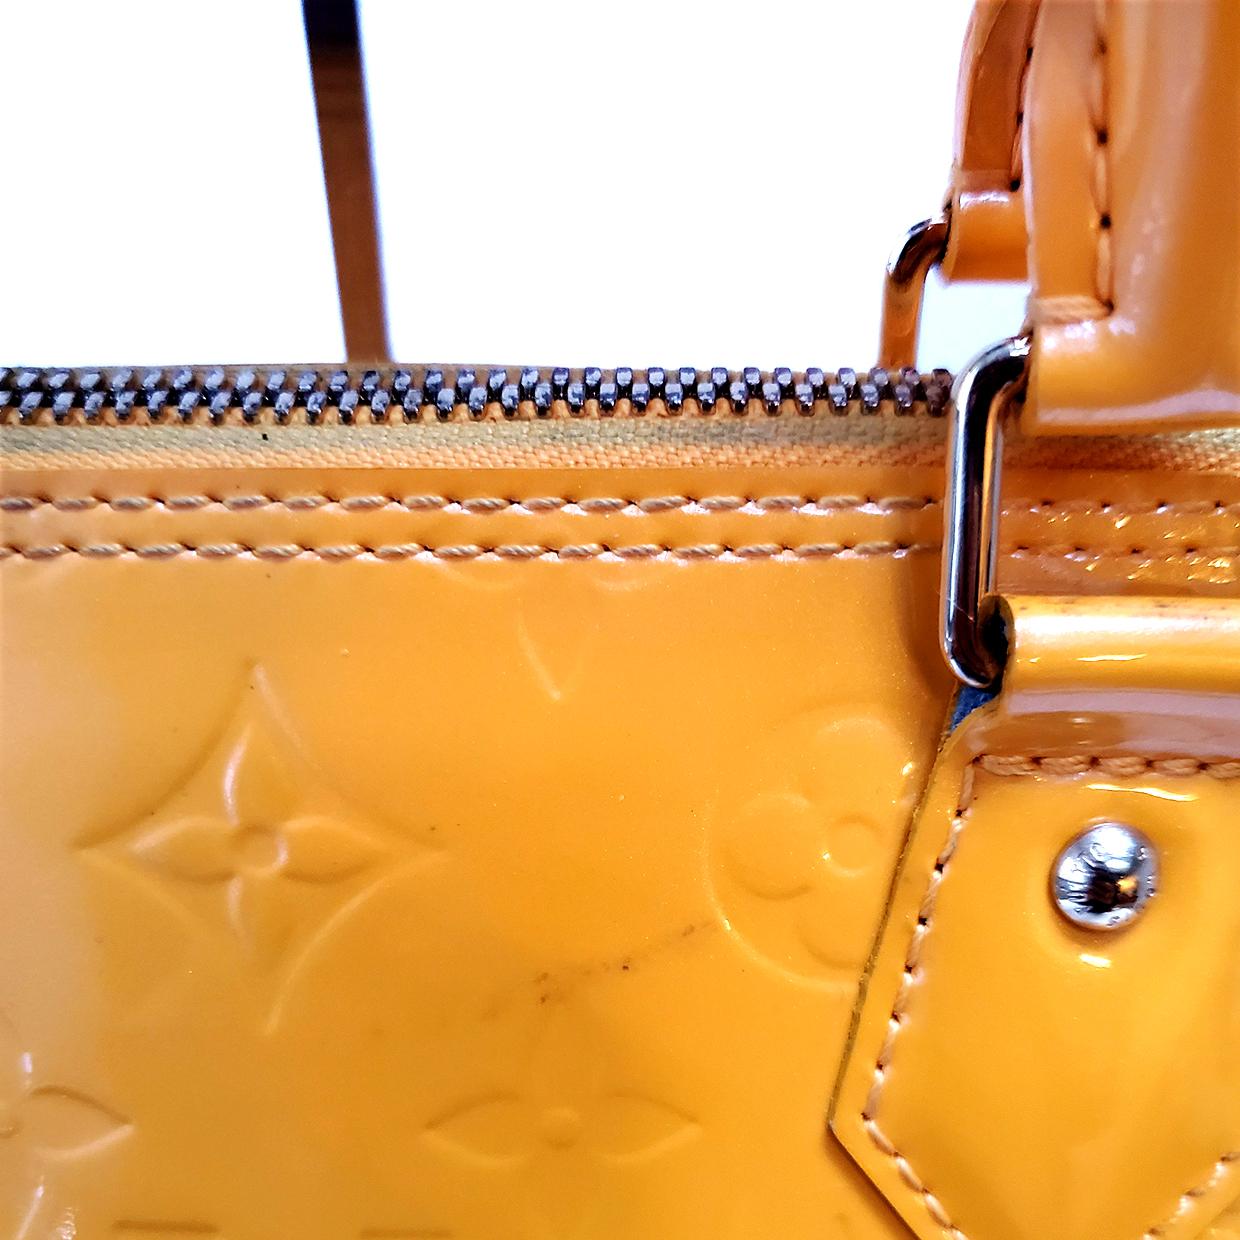 Louis Vuitton Vernis Alma PM Passion Yellow Monogram Hand Bag In Good Condition For Sale In Columbia, MO